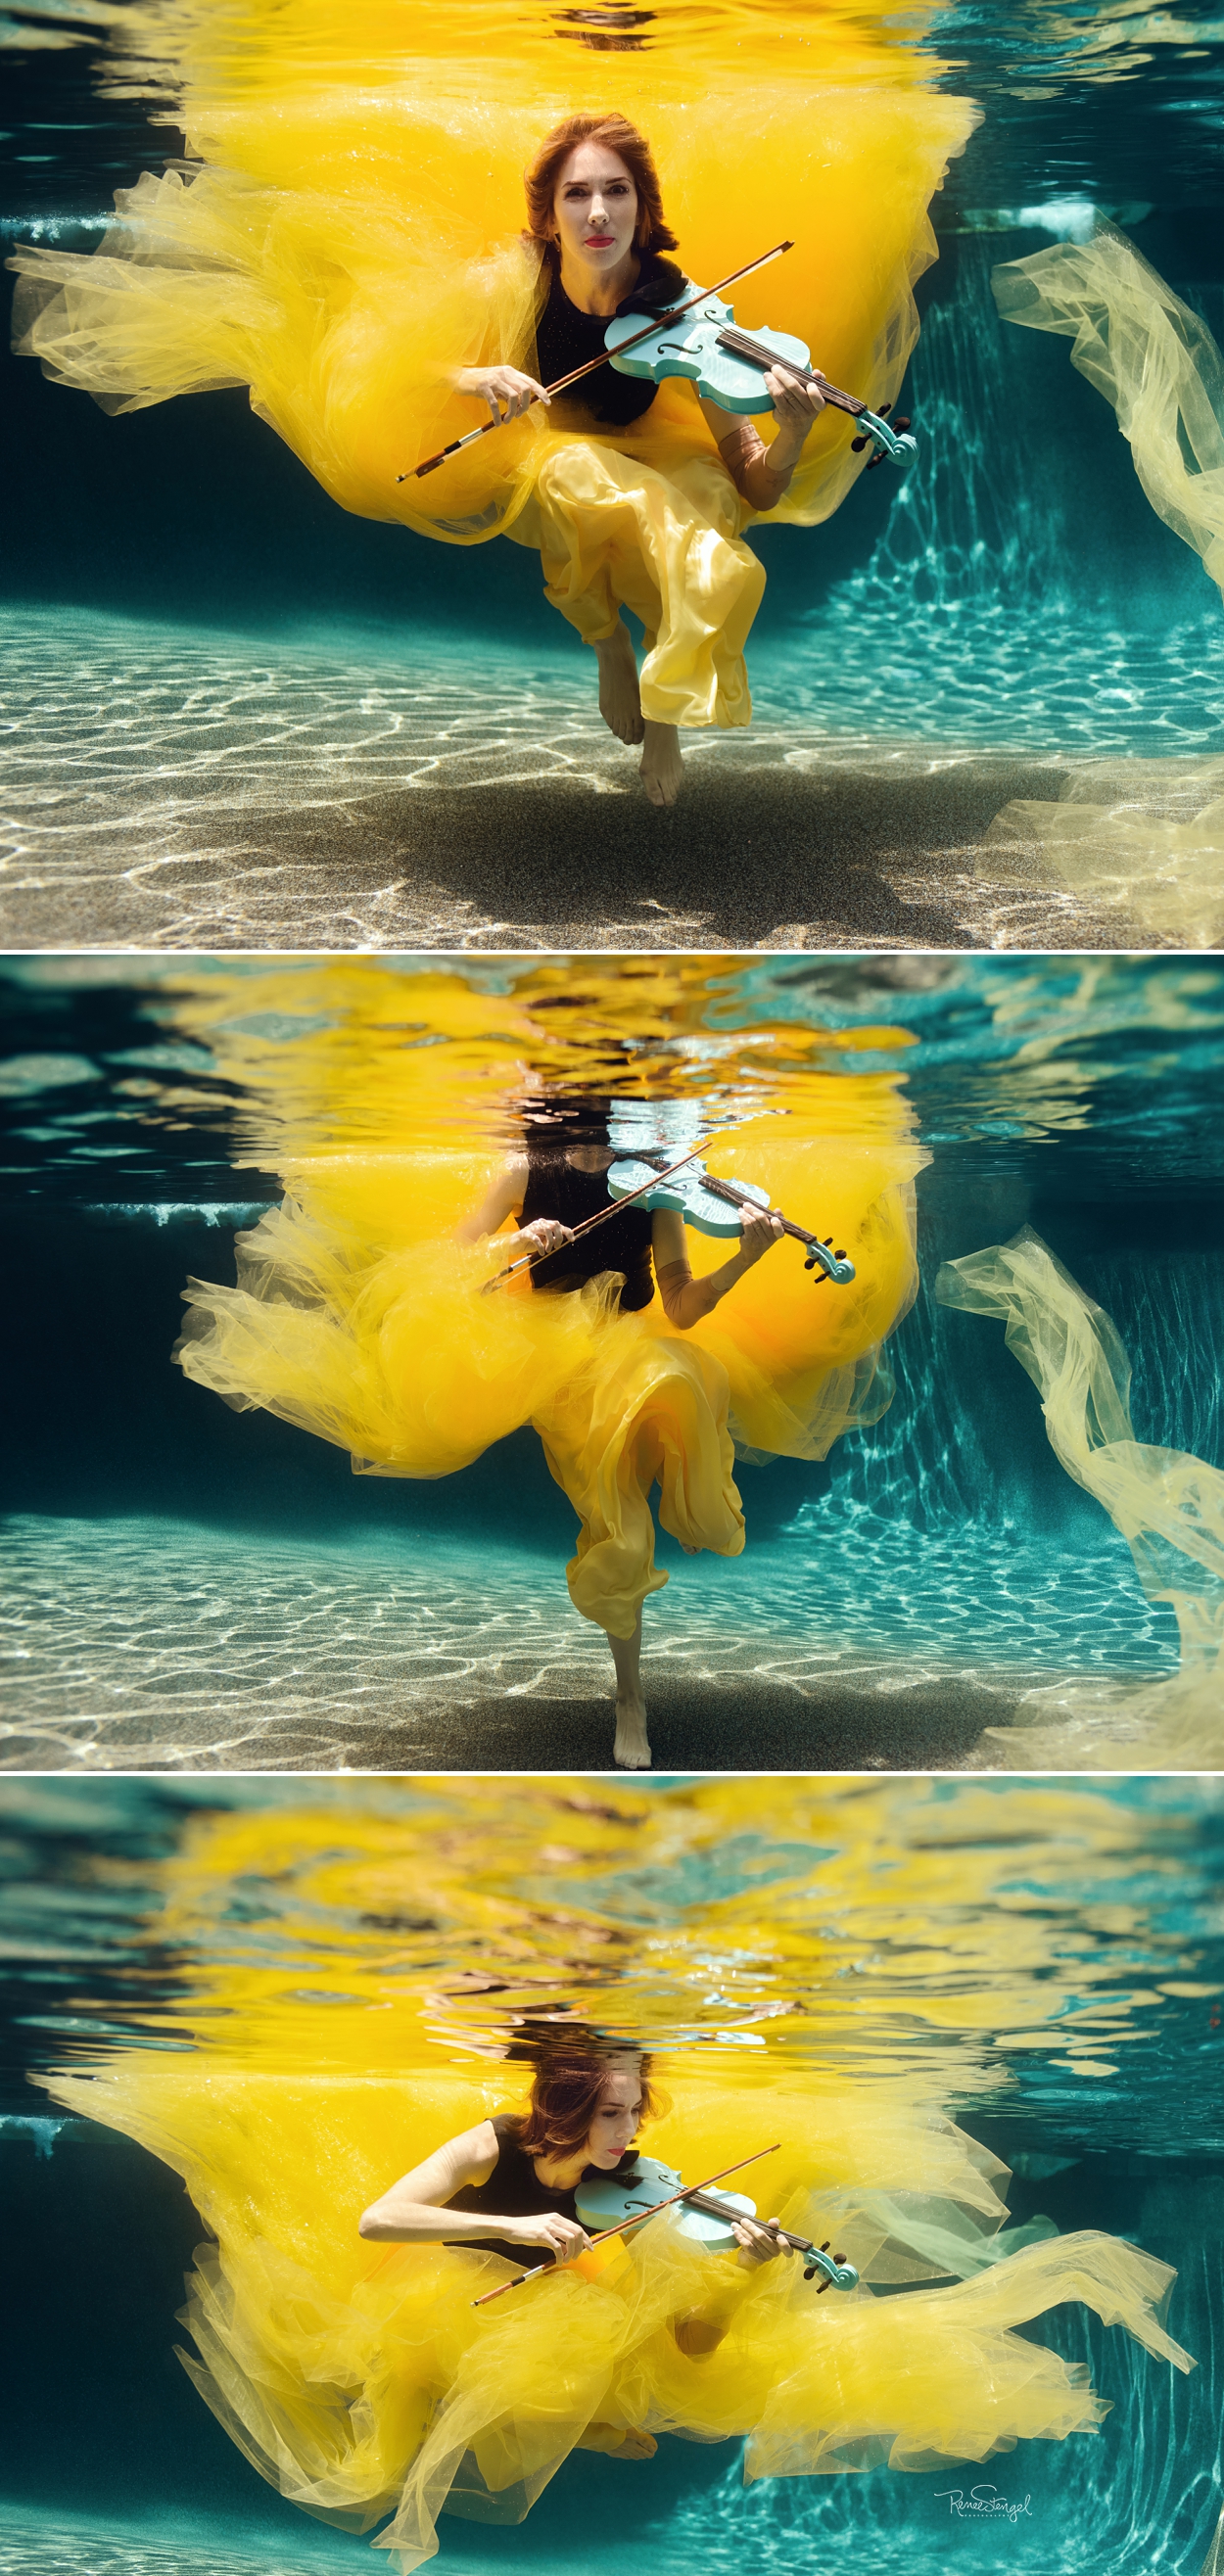 Copywriter Club's Kira Hug playing a teal Violin Underwater in Yellow Tulle dress from RCB Fashion